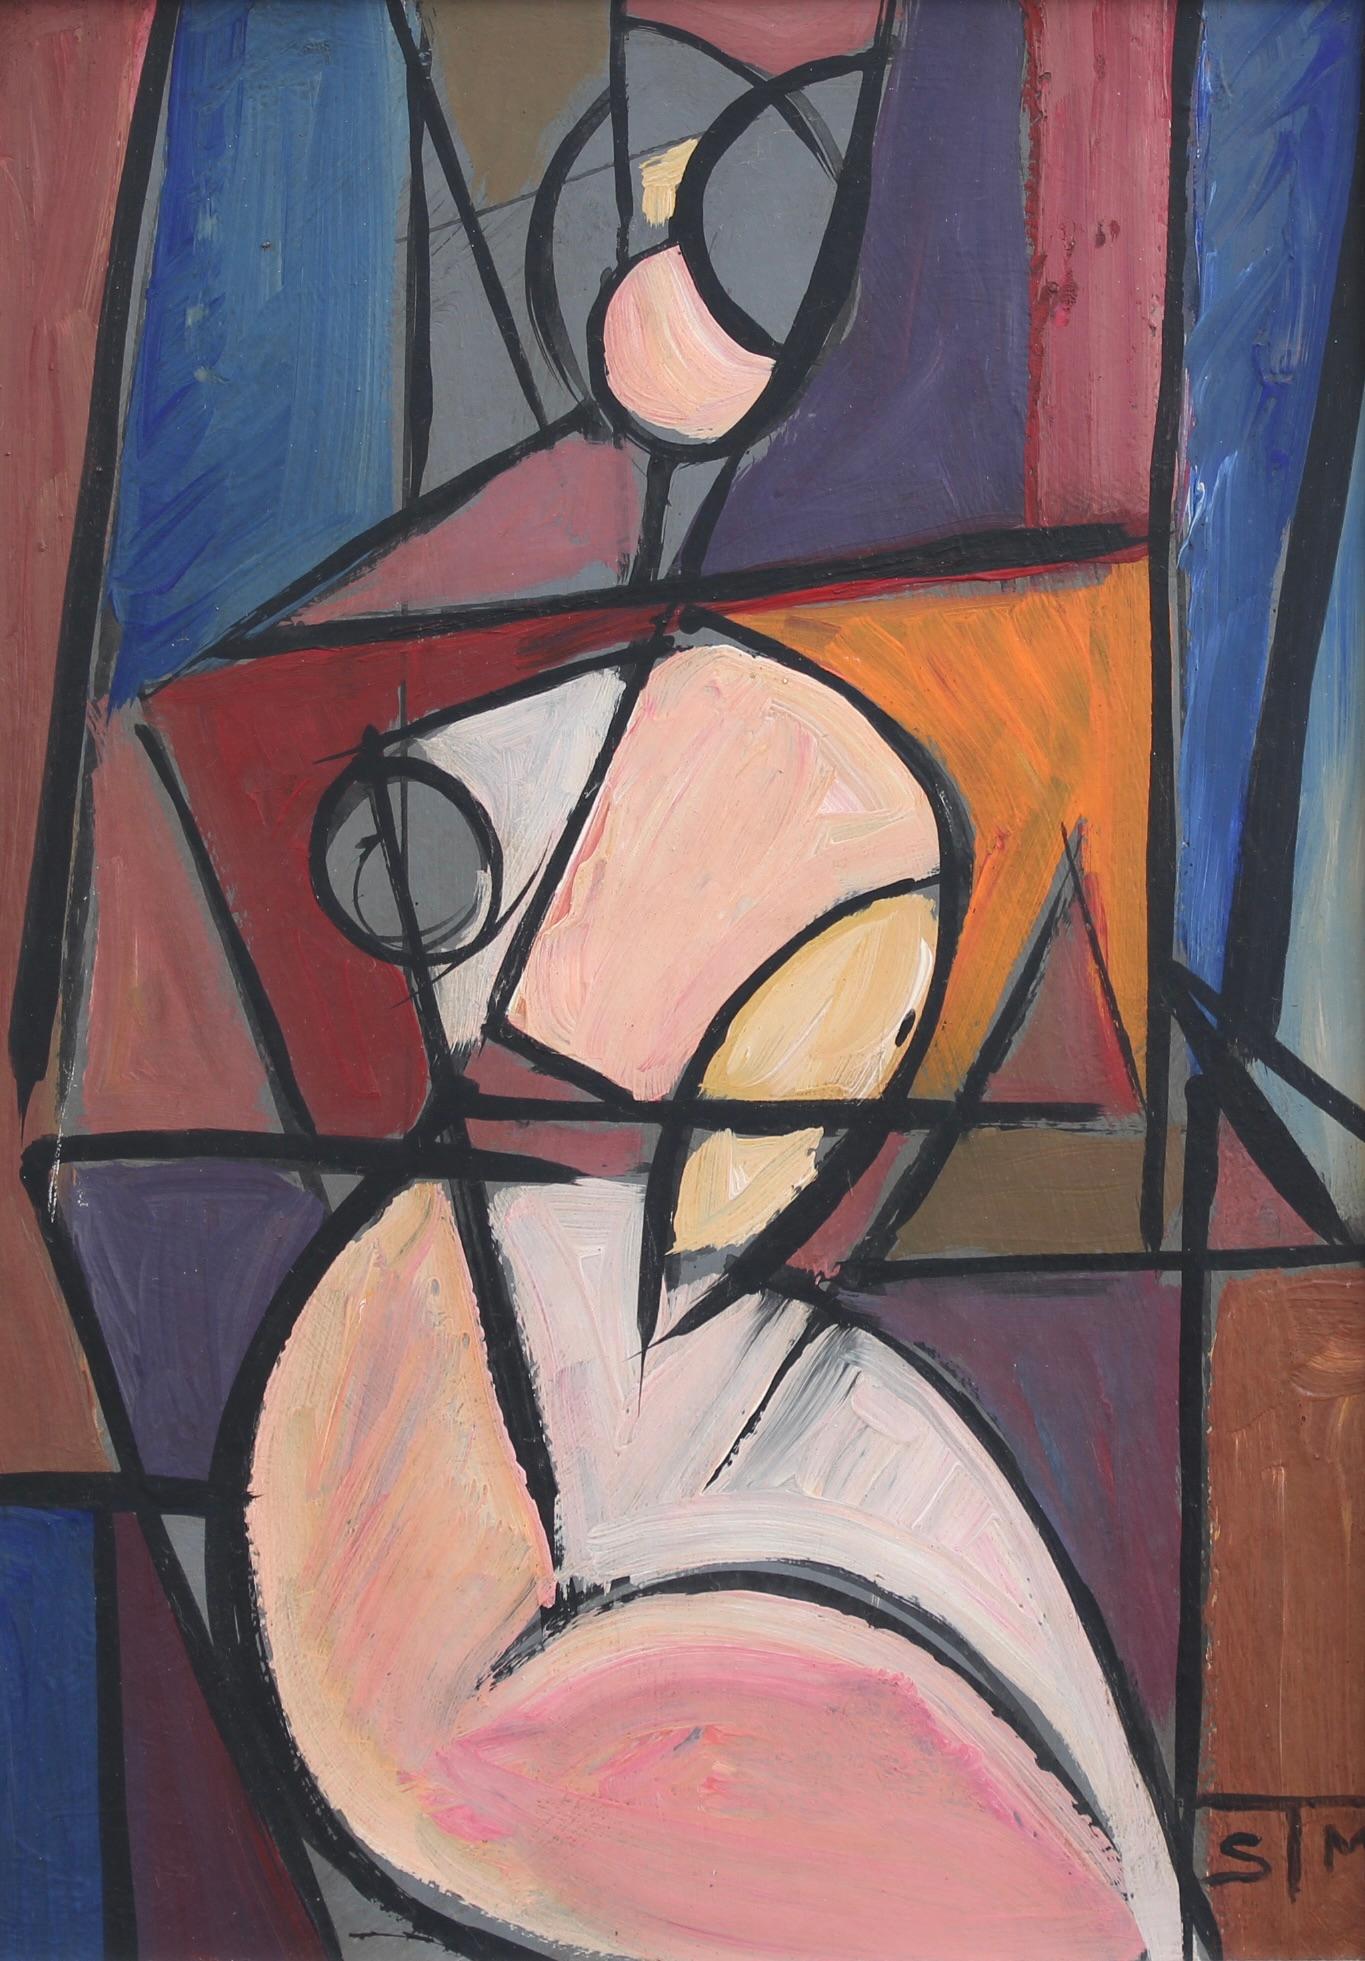 Radiant Reflections: Cubist Portrait of a Woman - Painting by STM